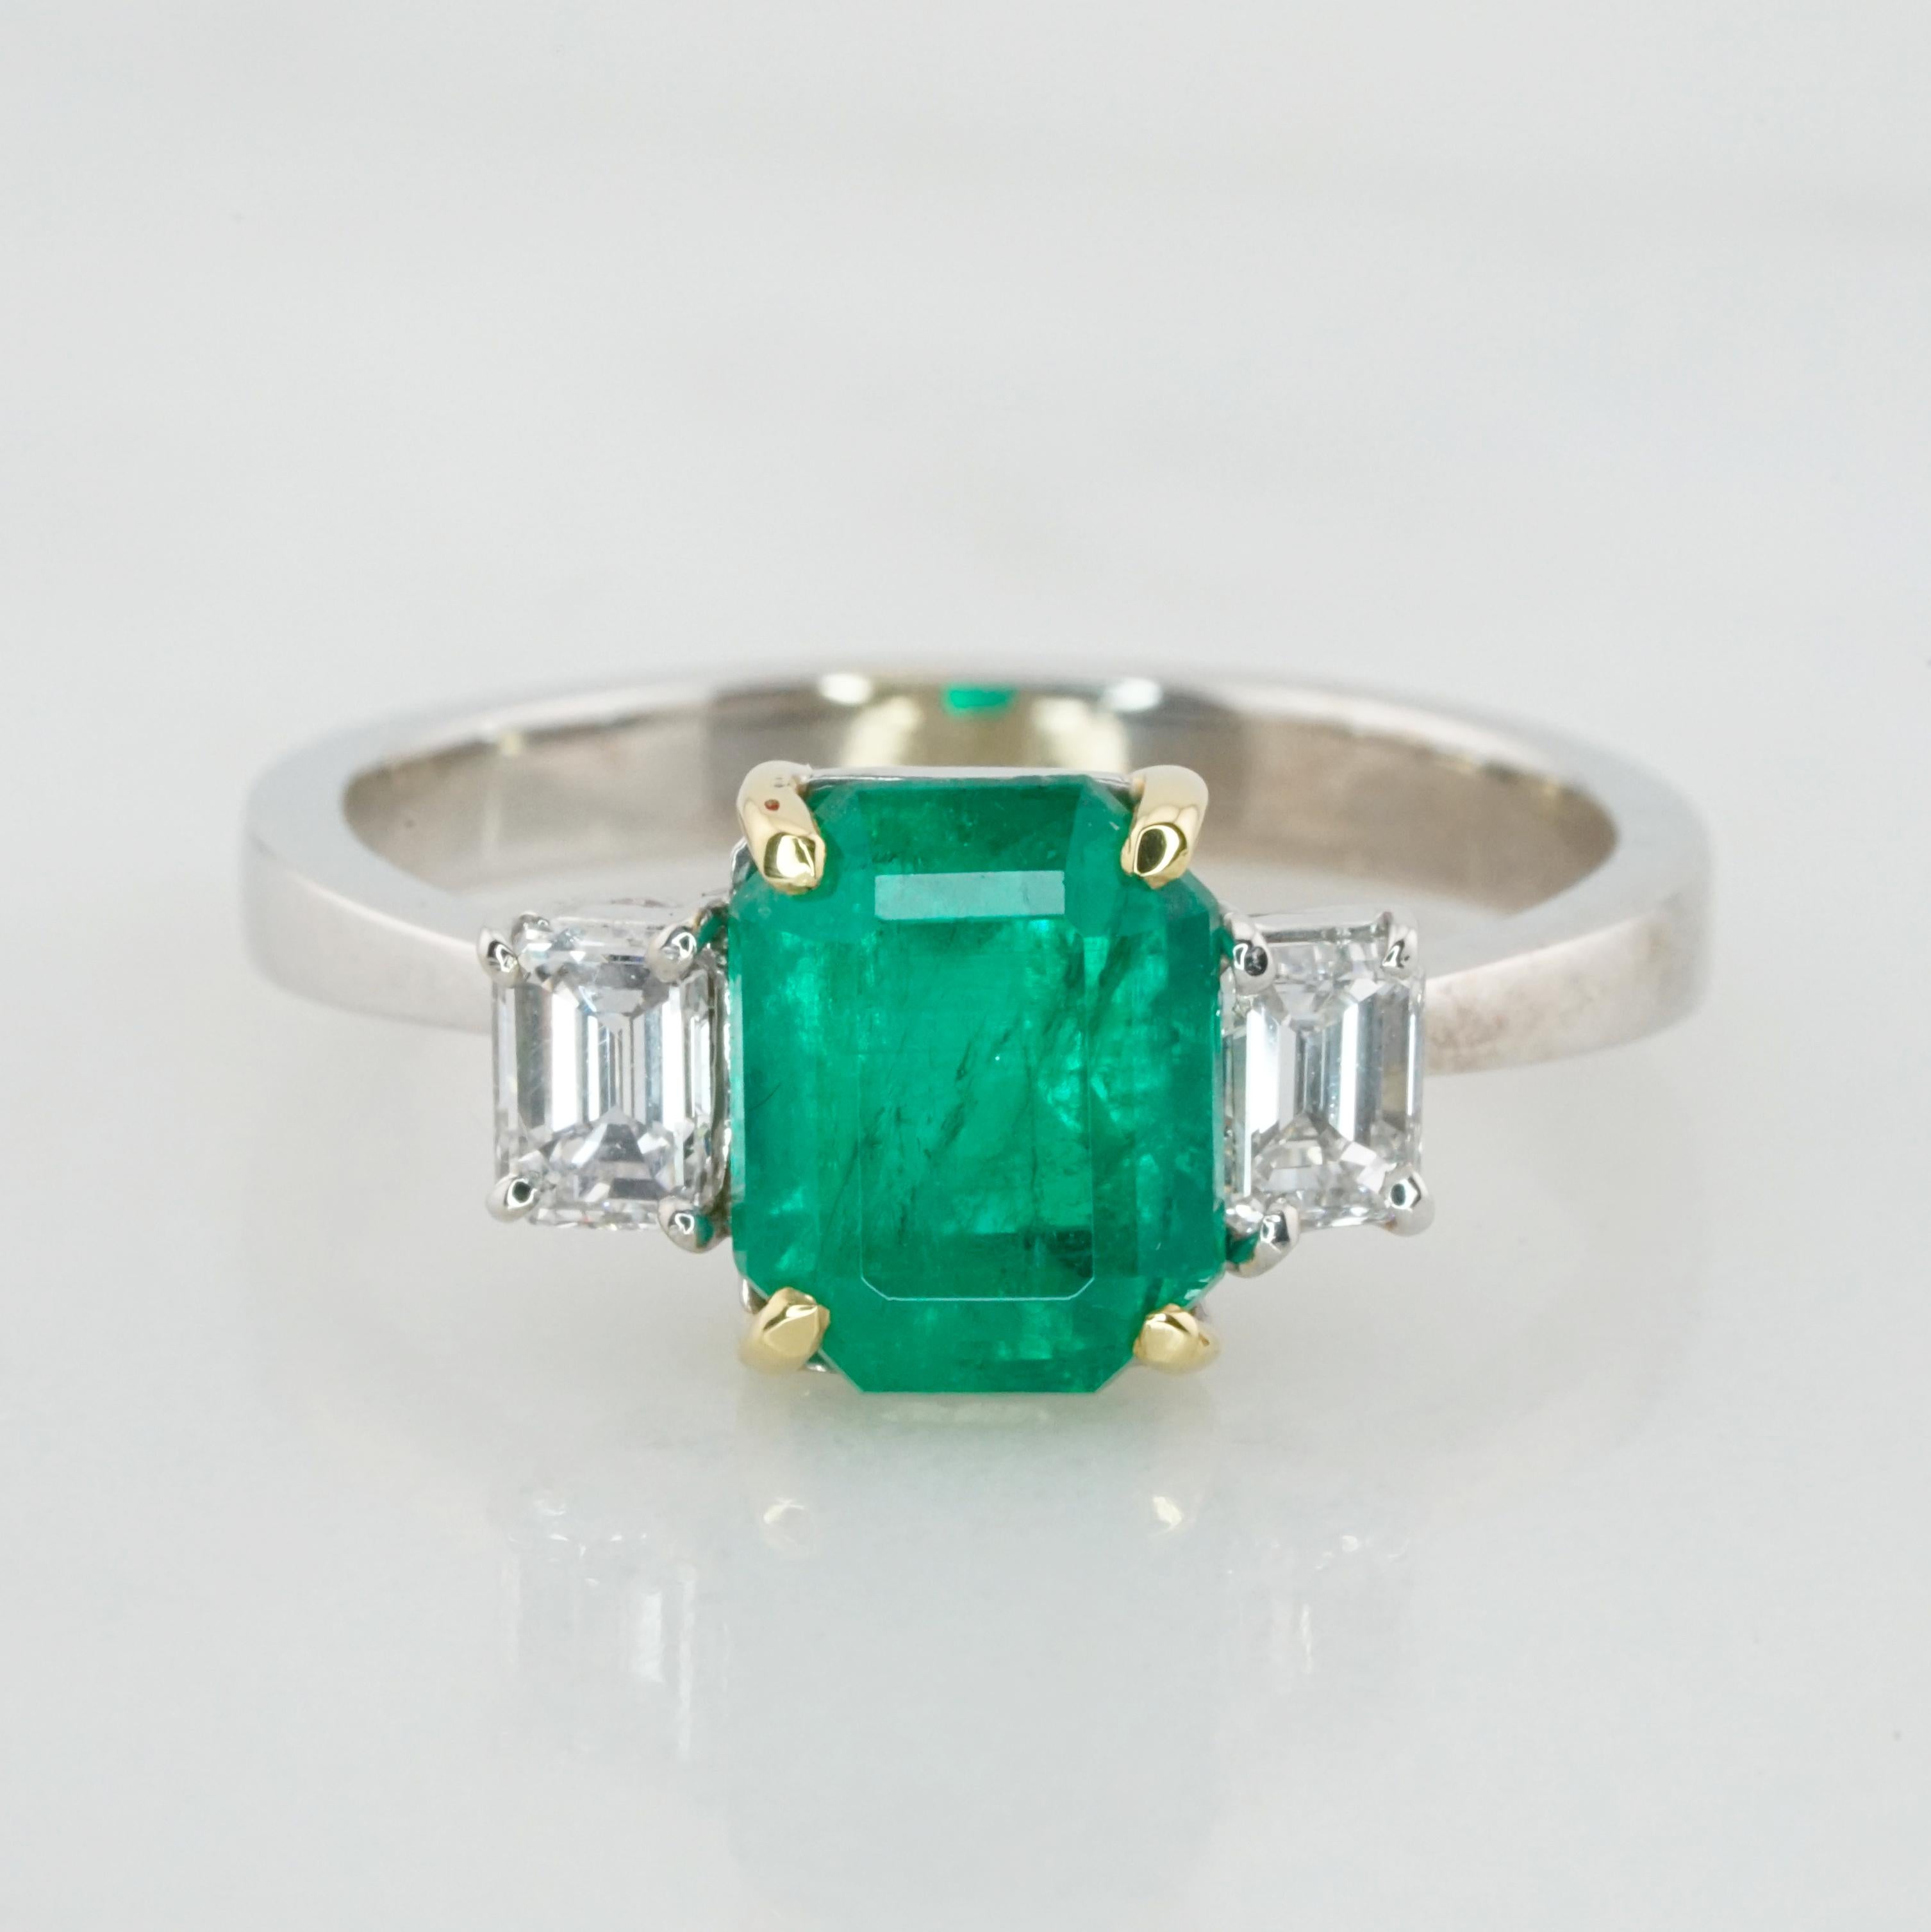 Immerse yourself in the splendor of this Sanpietro creation by Antinori, featuring a certified 2.12 carat Colombian emerald, resplendent in its vivid green glory. Originating from the lush, verdant landscapes of Colombia, the emerald exudes an